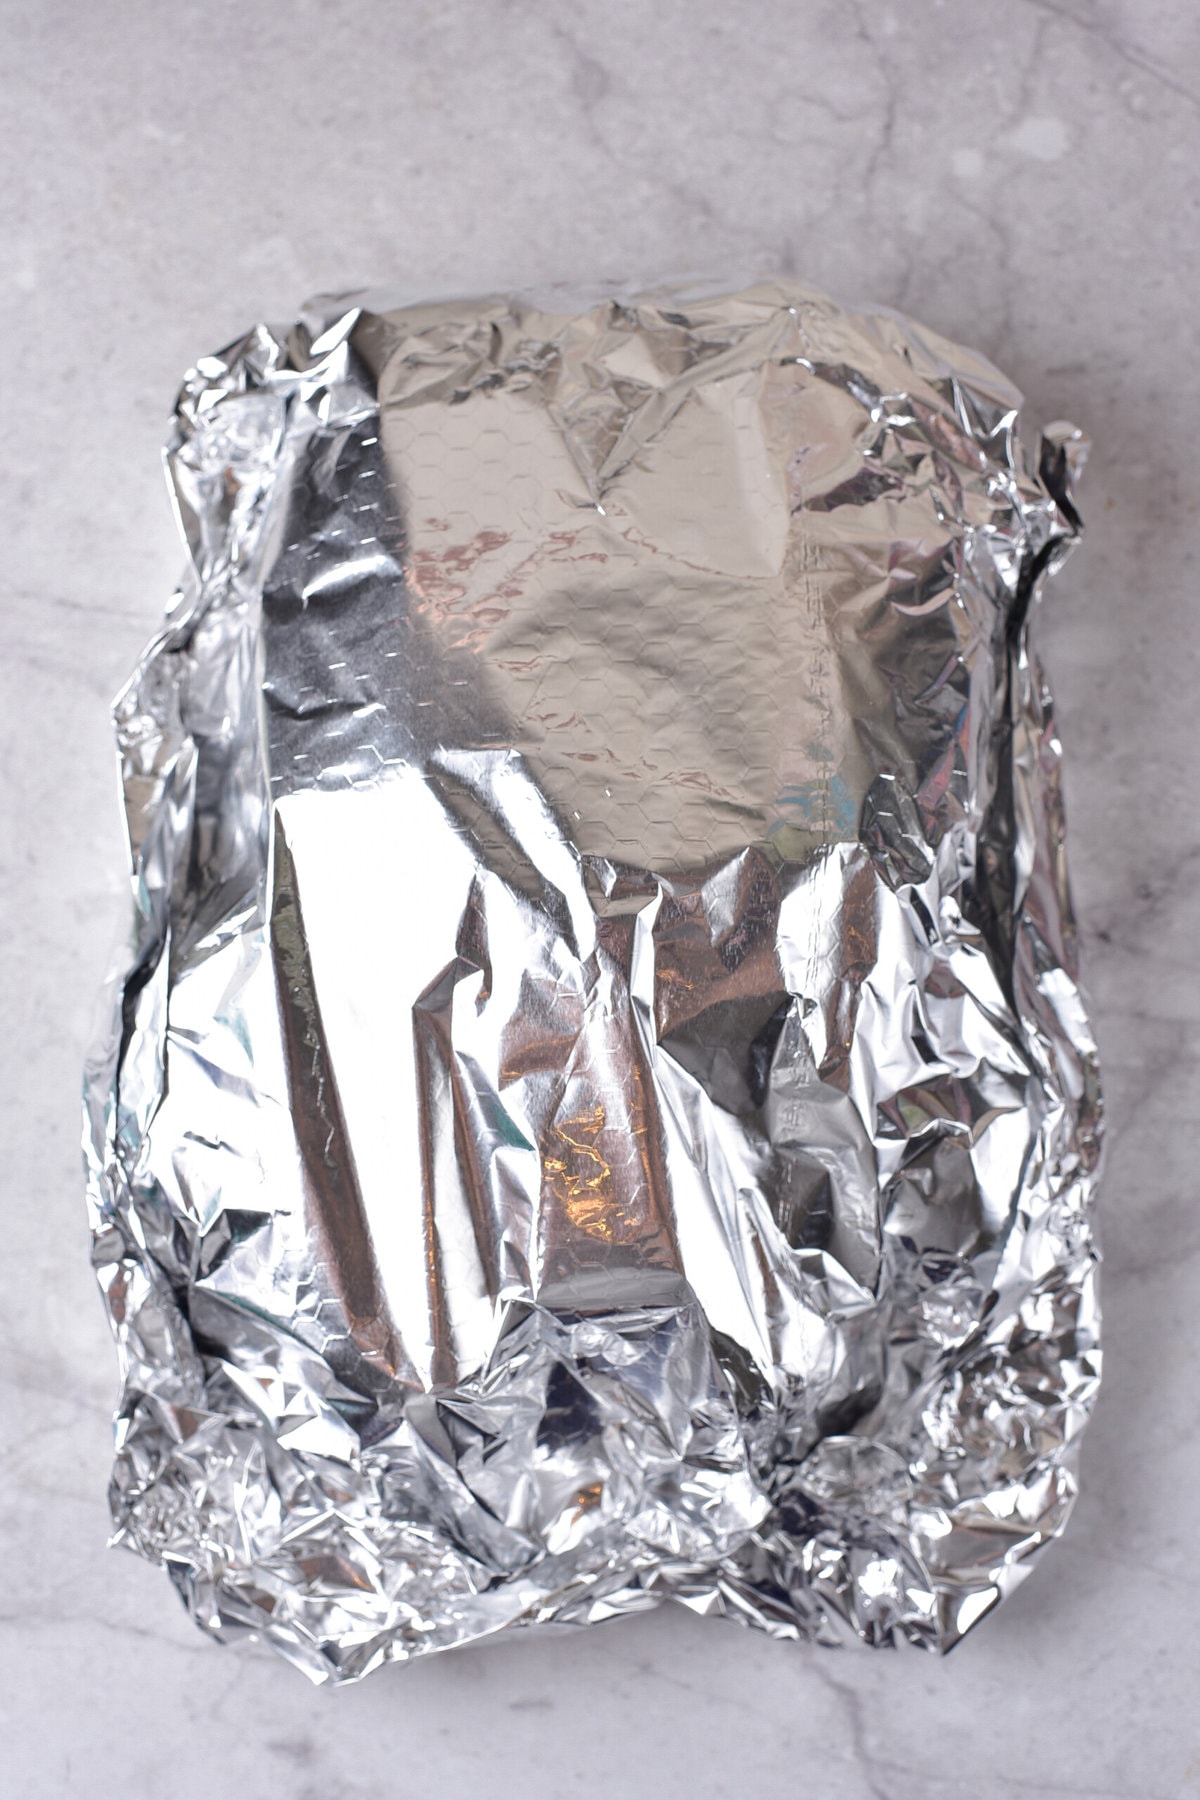 Wrapping the meat with foil.